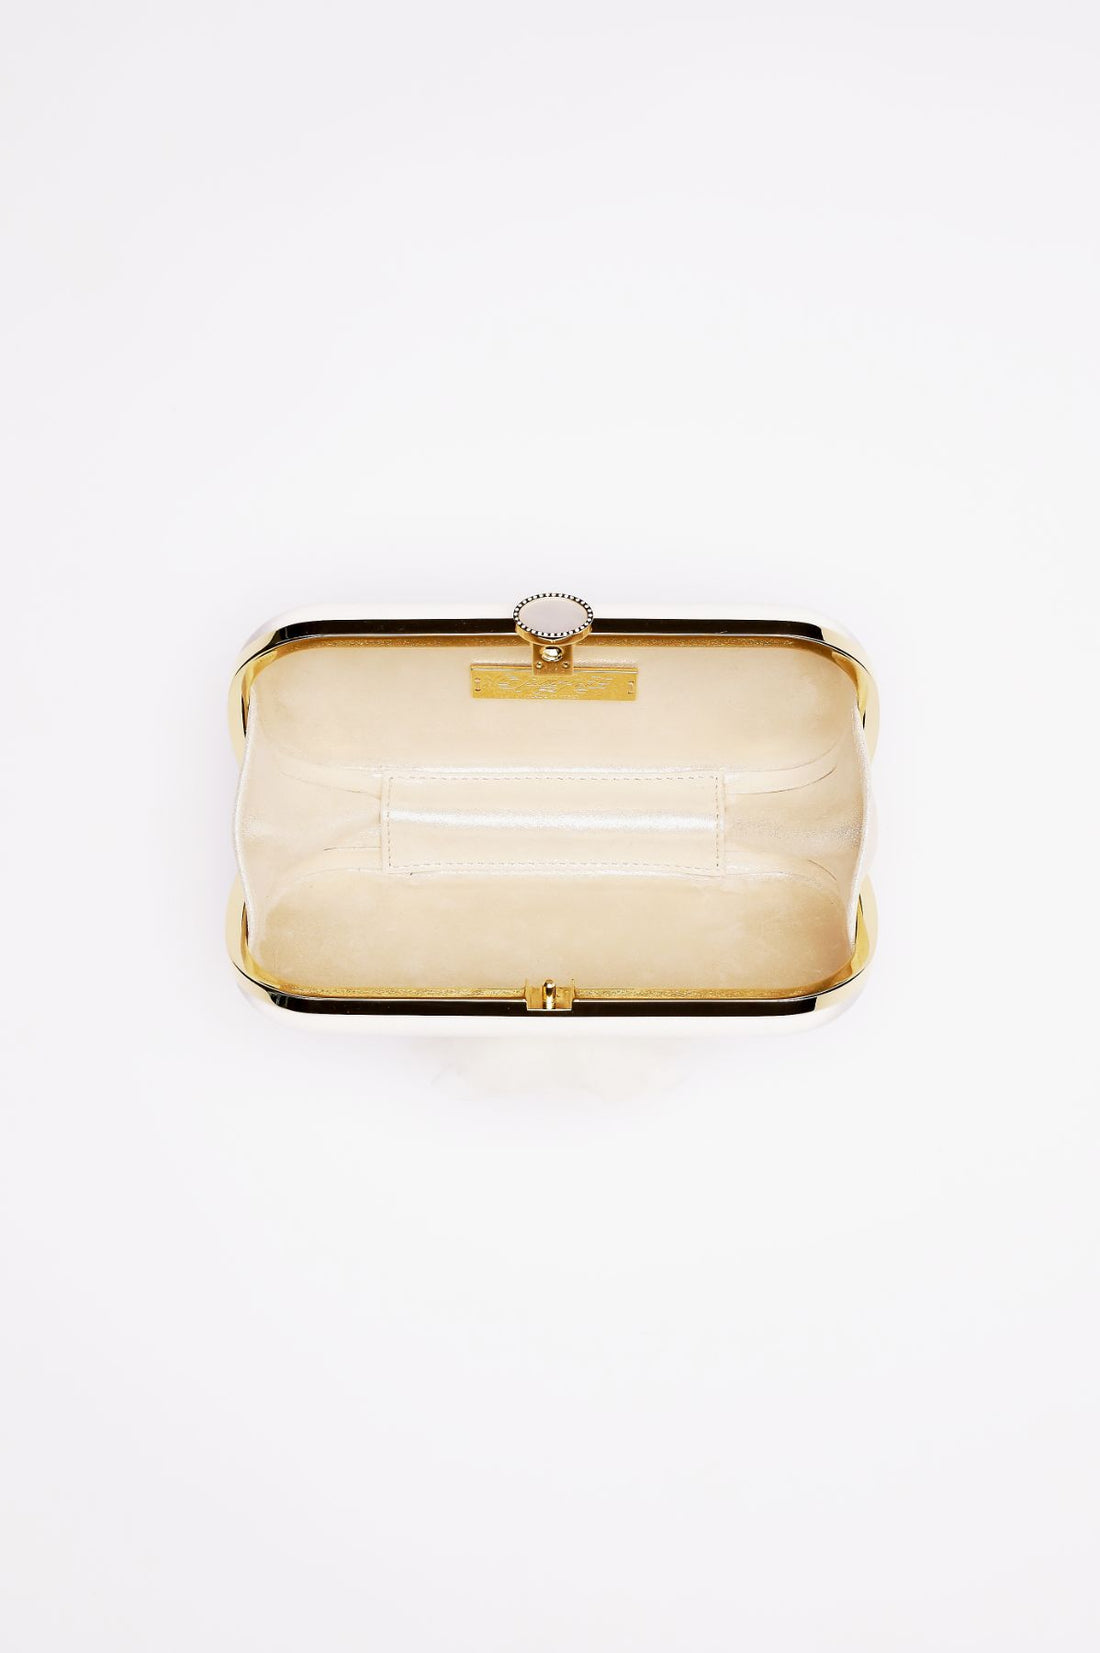 Top open view view of Ivory Bella Fiori Clutch with  Ivory organza flower with a micro pearl center and gold frame.